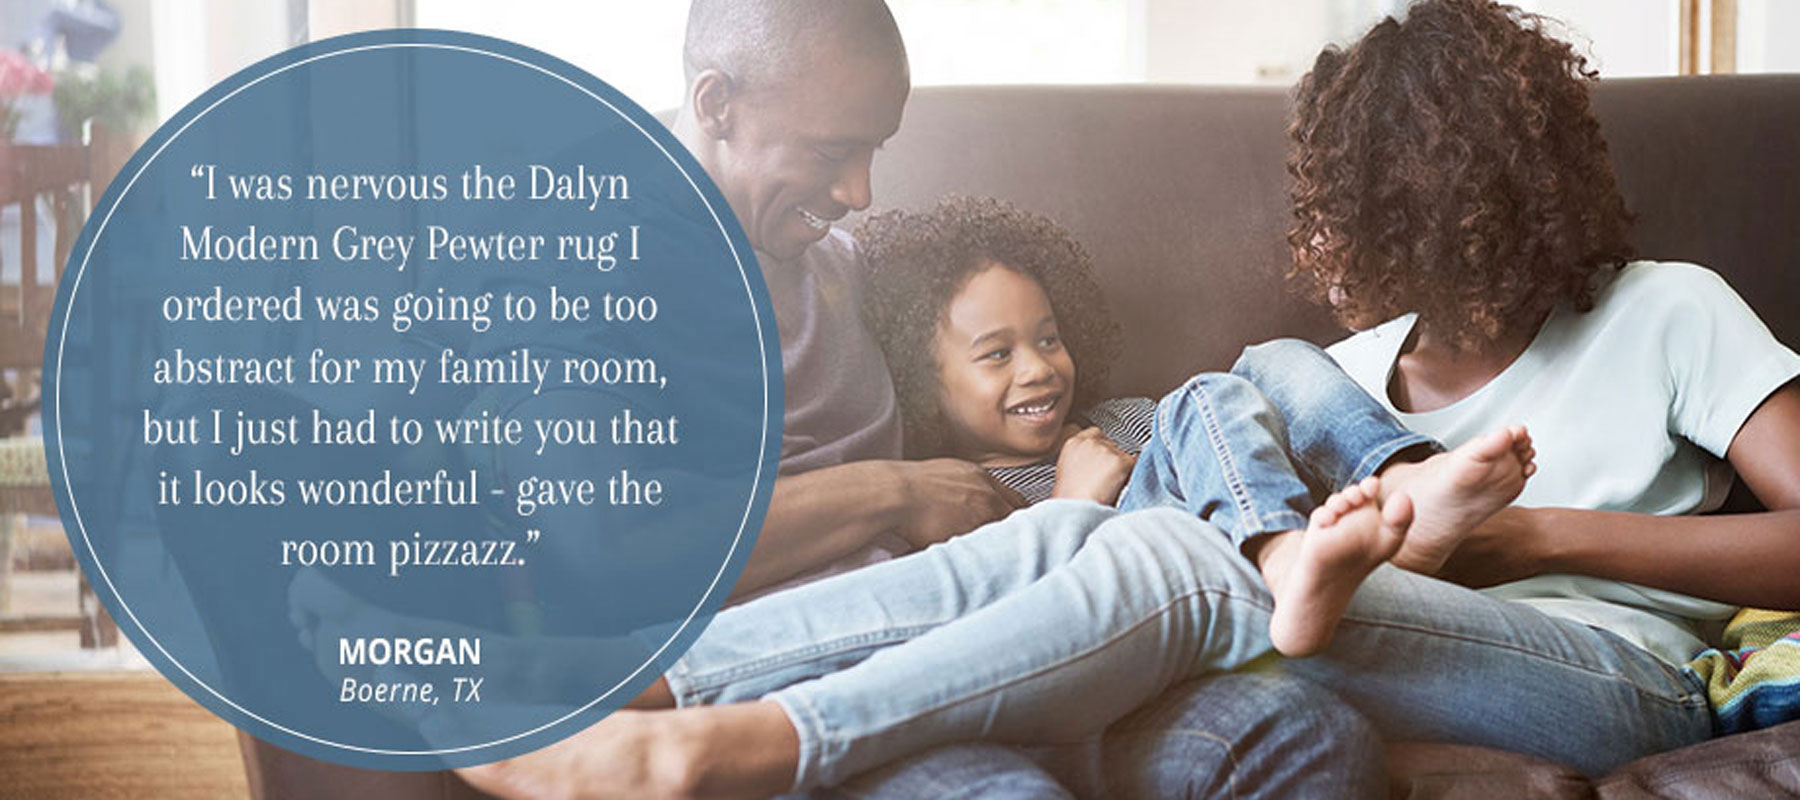 Customer Testimonial - I was nervous the Dalyn Modern Grey Pewter rug I ordered was going to be too abstract for my family room, but I just had to write to you that it looks wonderful - gave the room pizzazz. Morgan - Boerne, TX